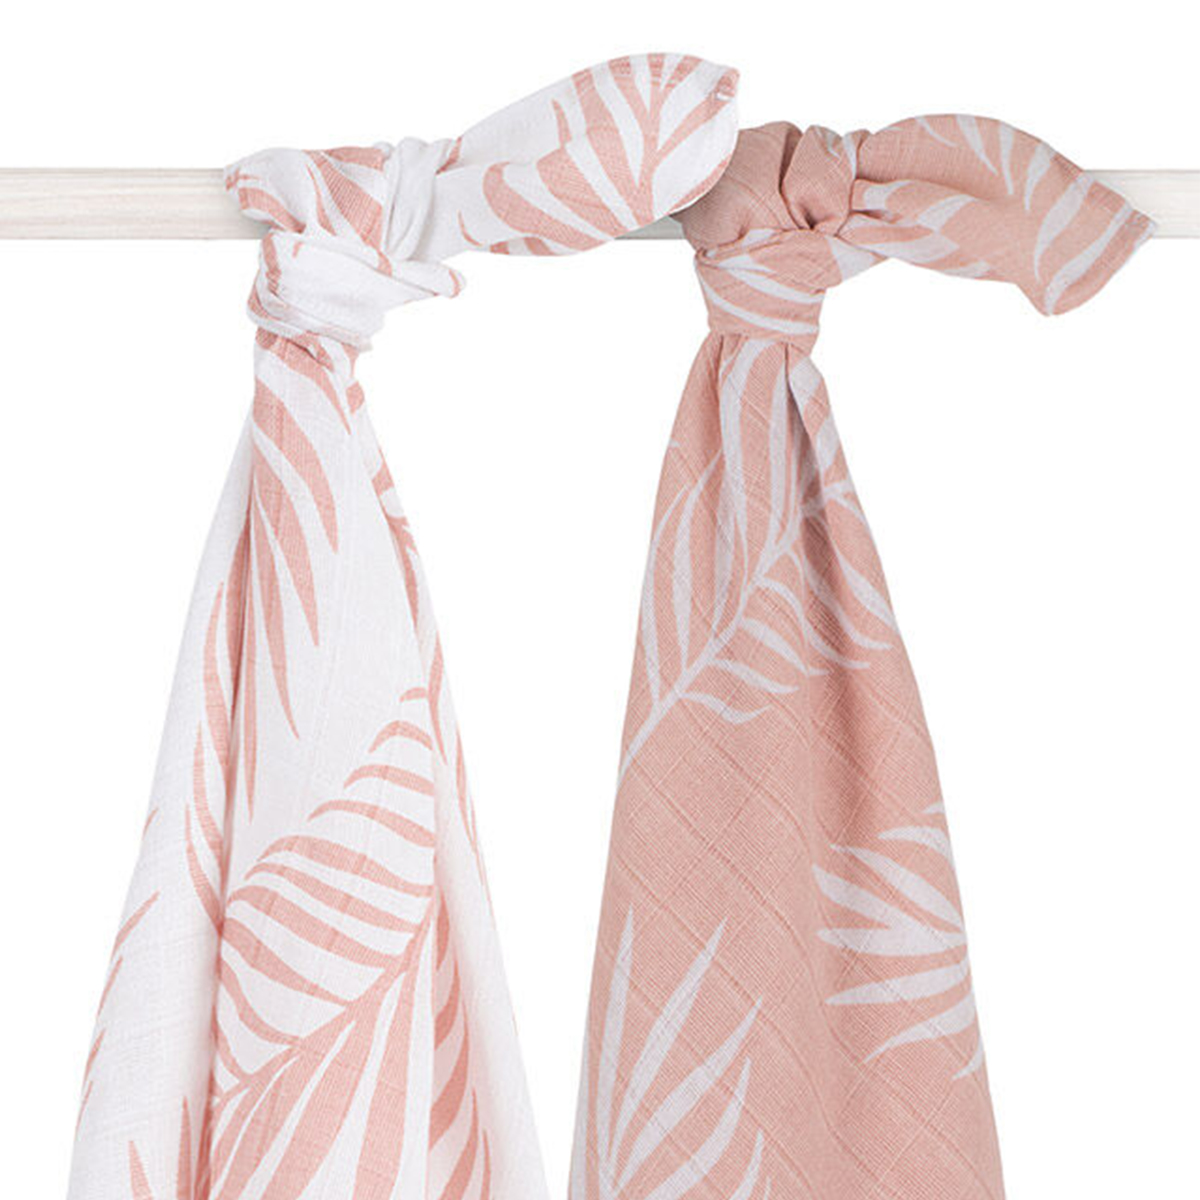 Jollein Set of 2 Large Pale Pink Hydrophilic Cloths